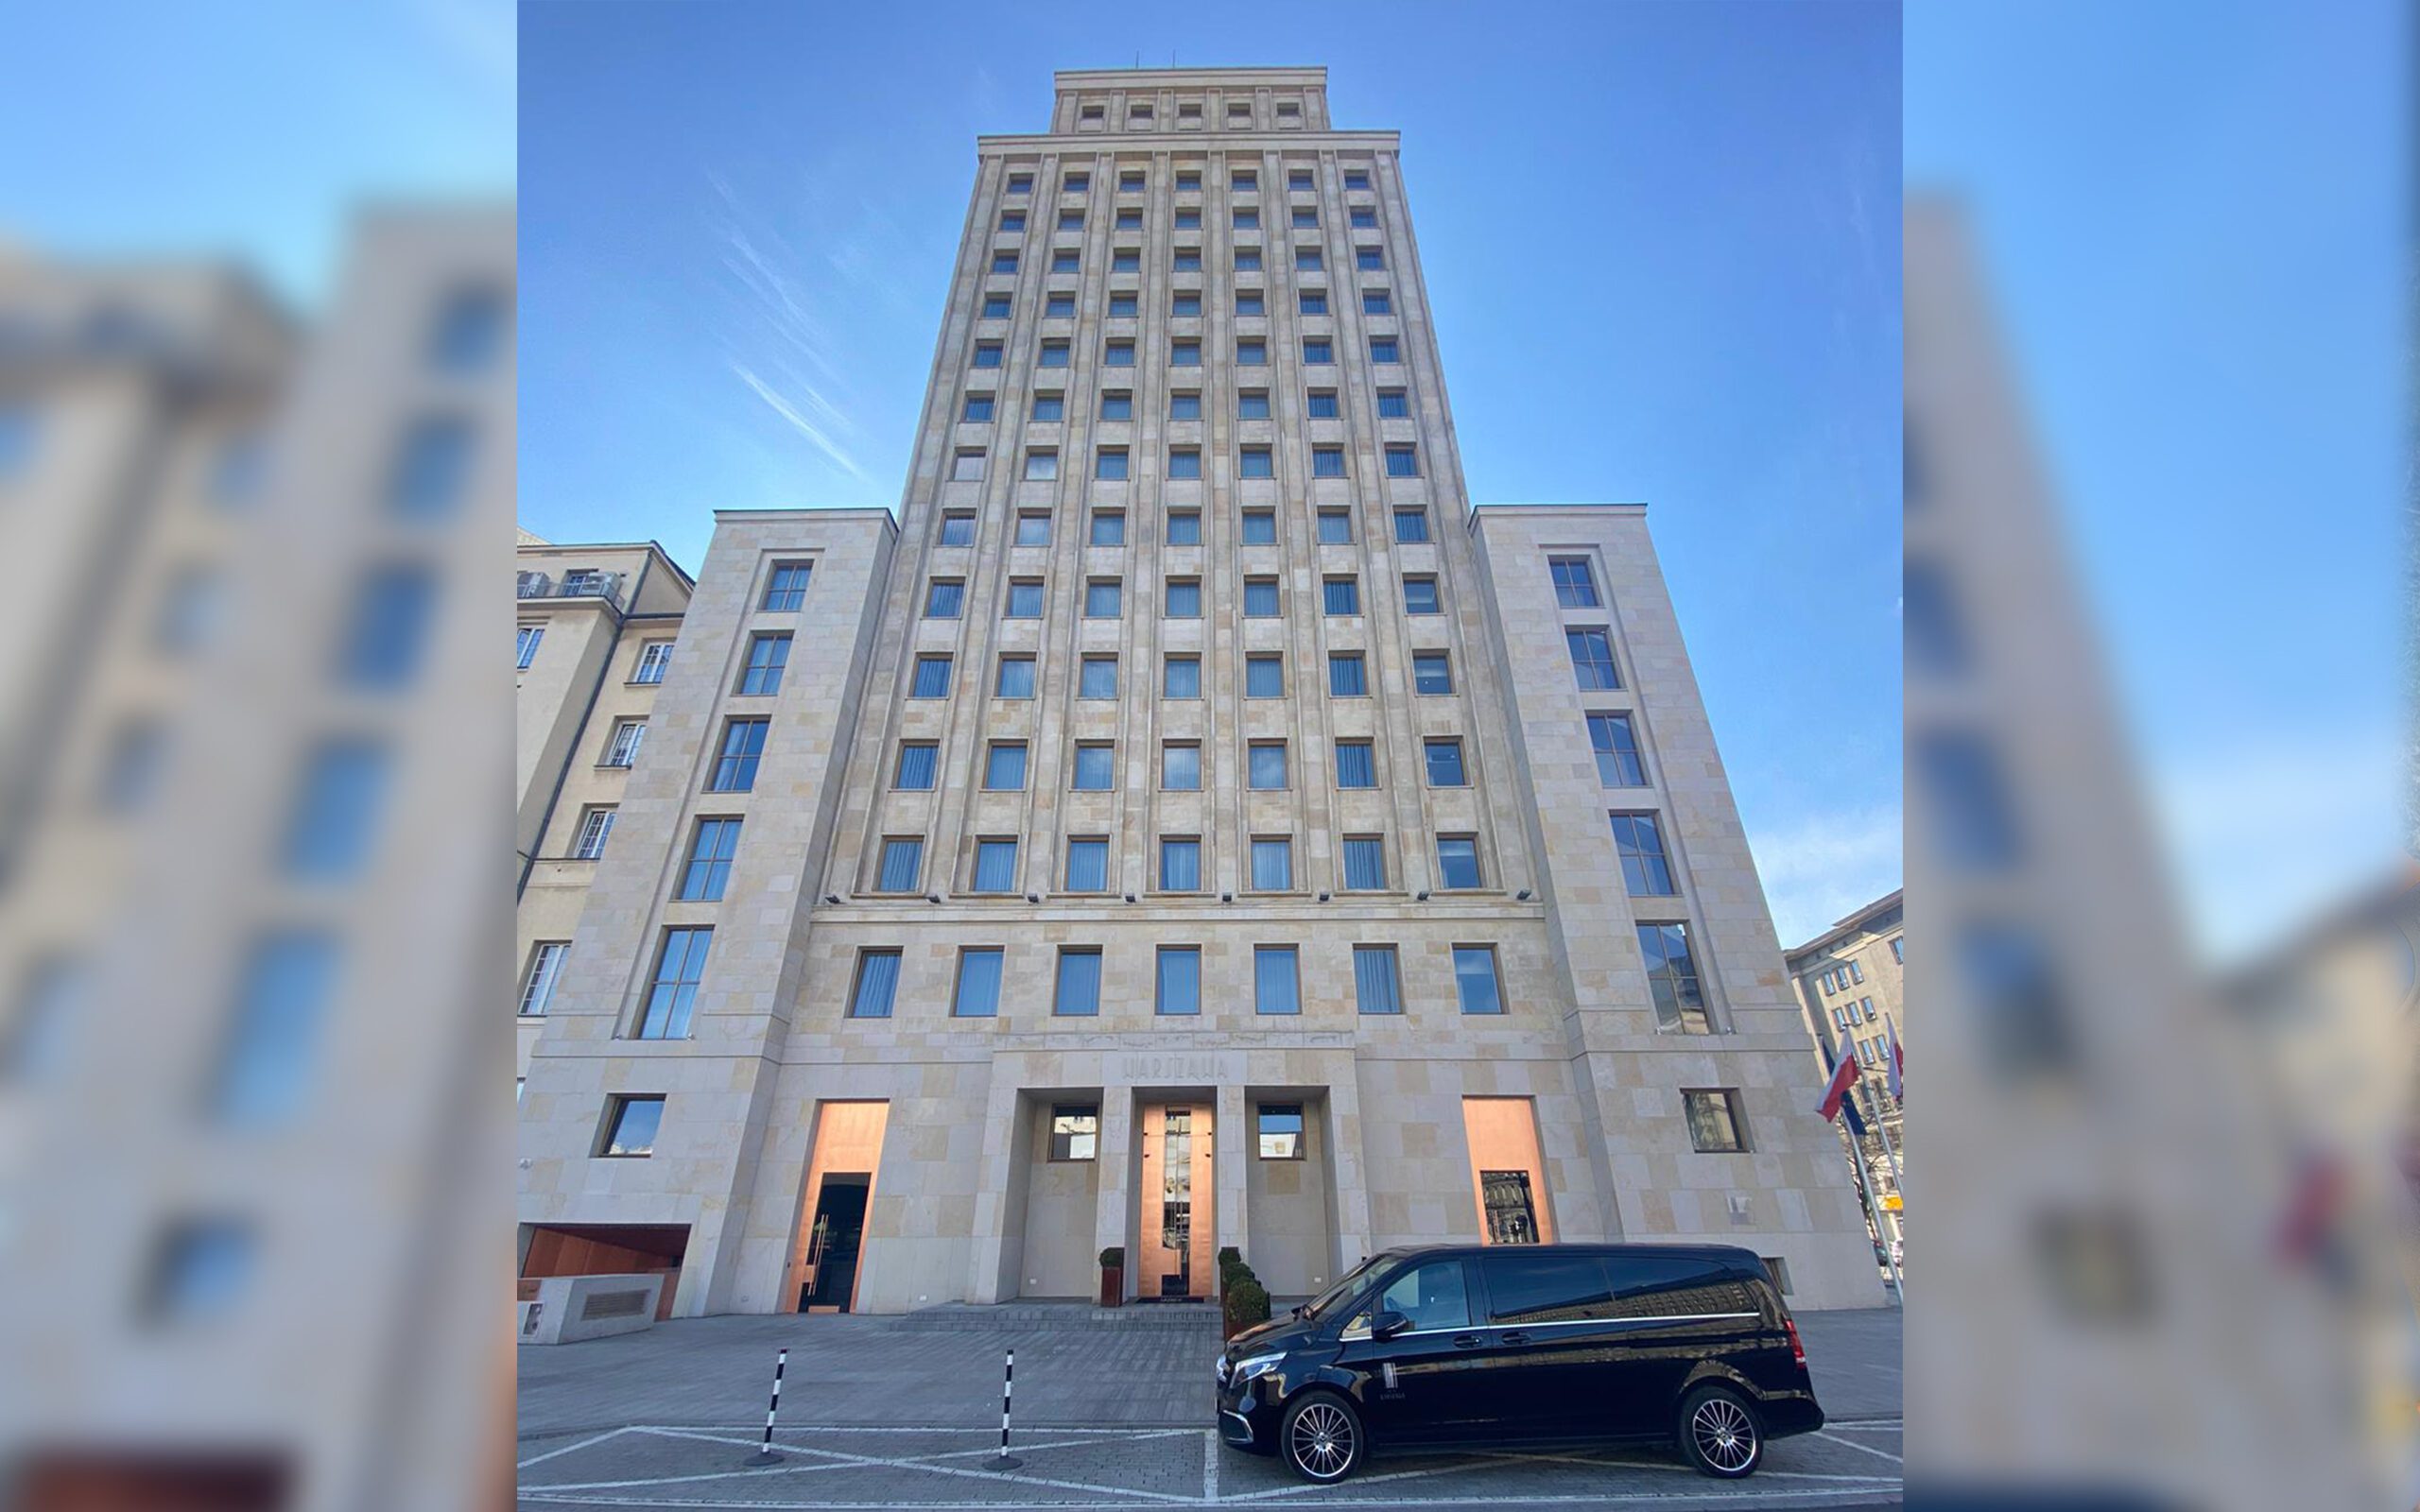 The Prudential Building in Warsaw, currently operating as Hotel Warszawa in Poland. 